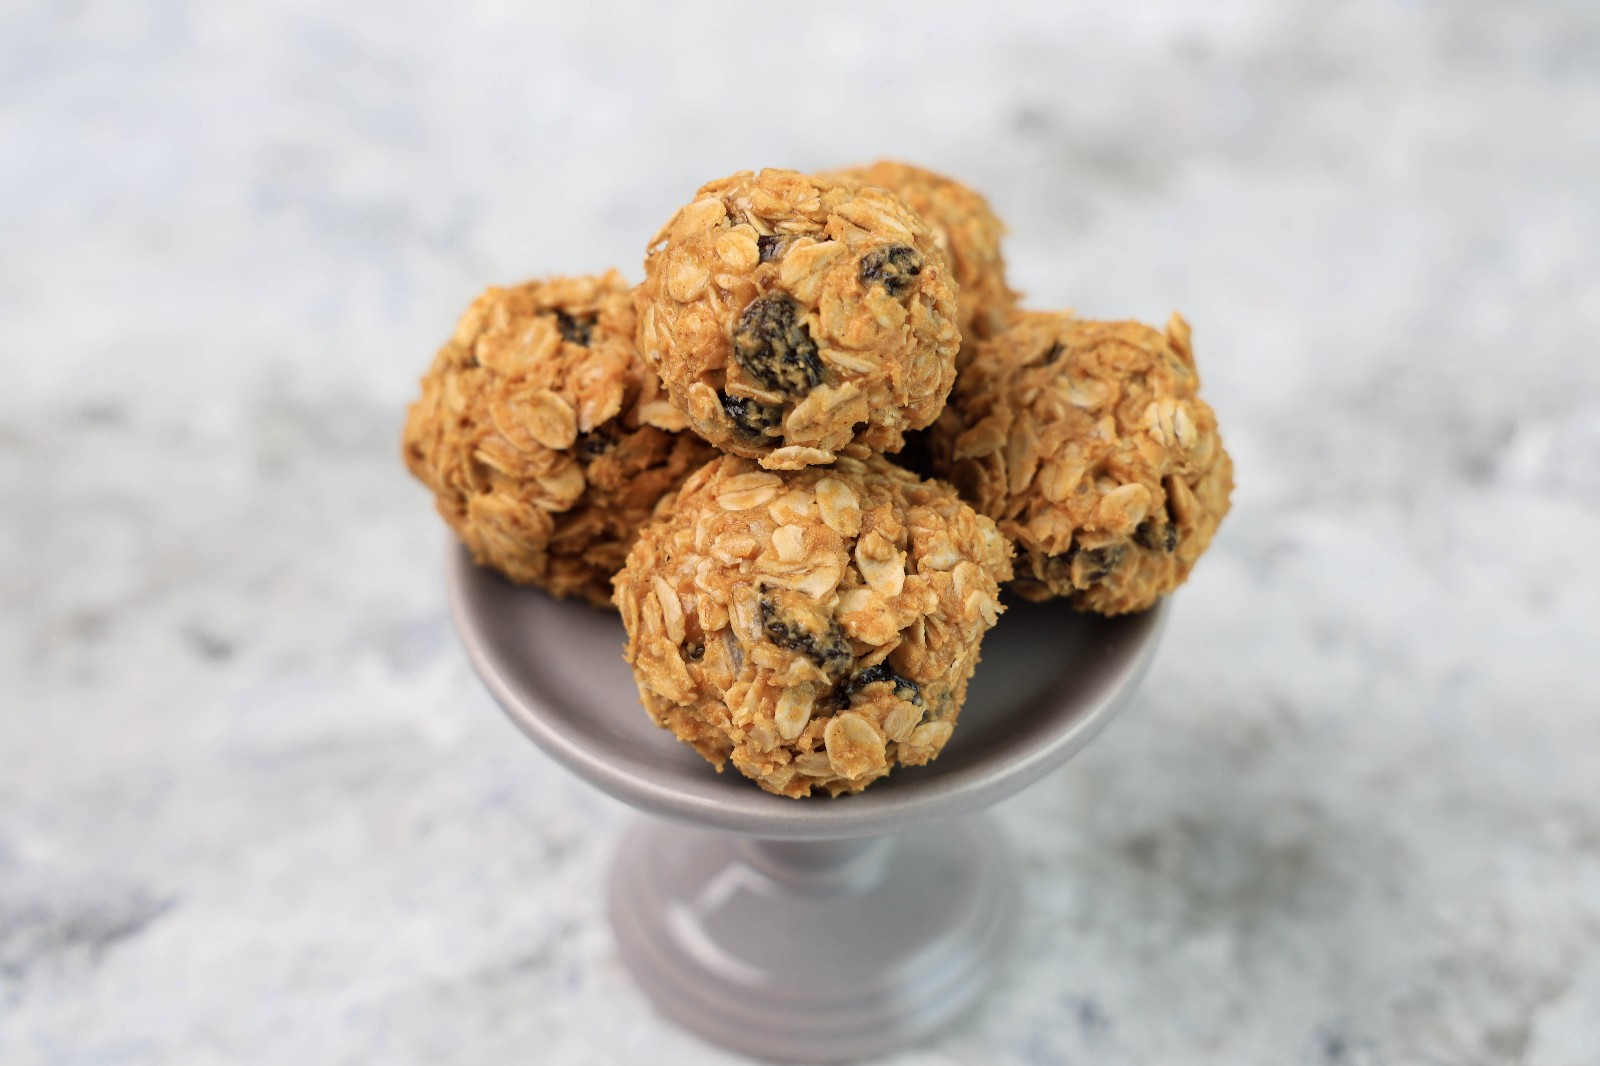 A grey dessert stand with a couple of oatmeal raisin balls.